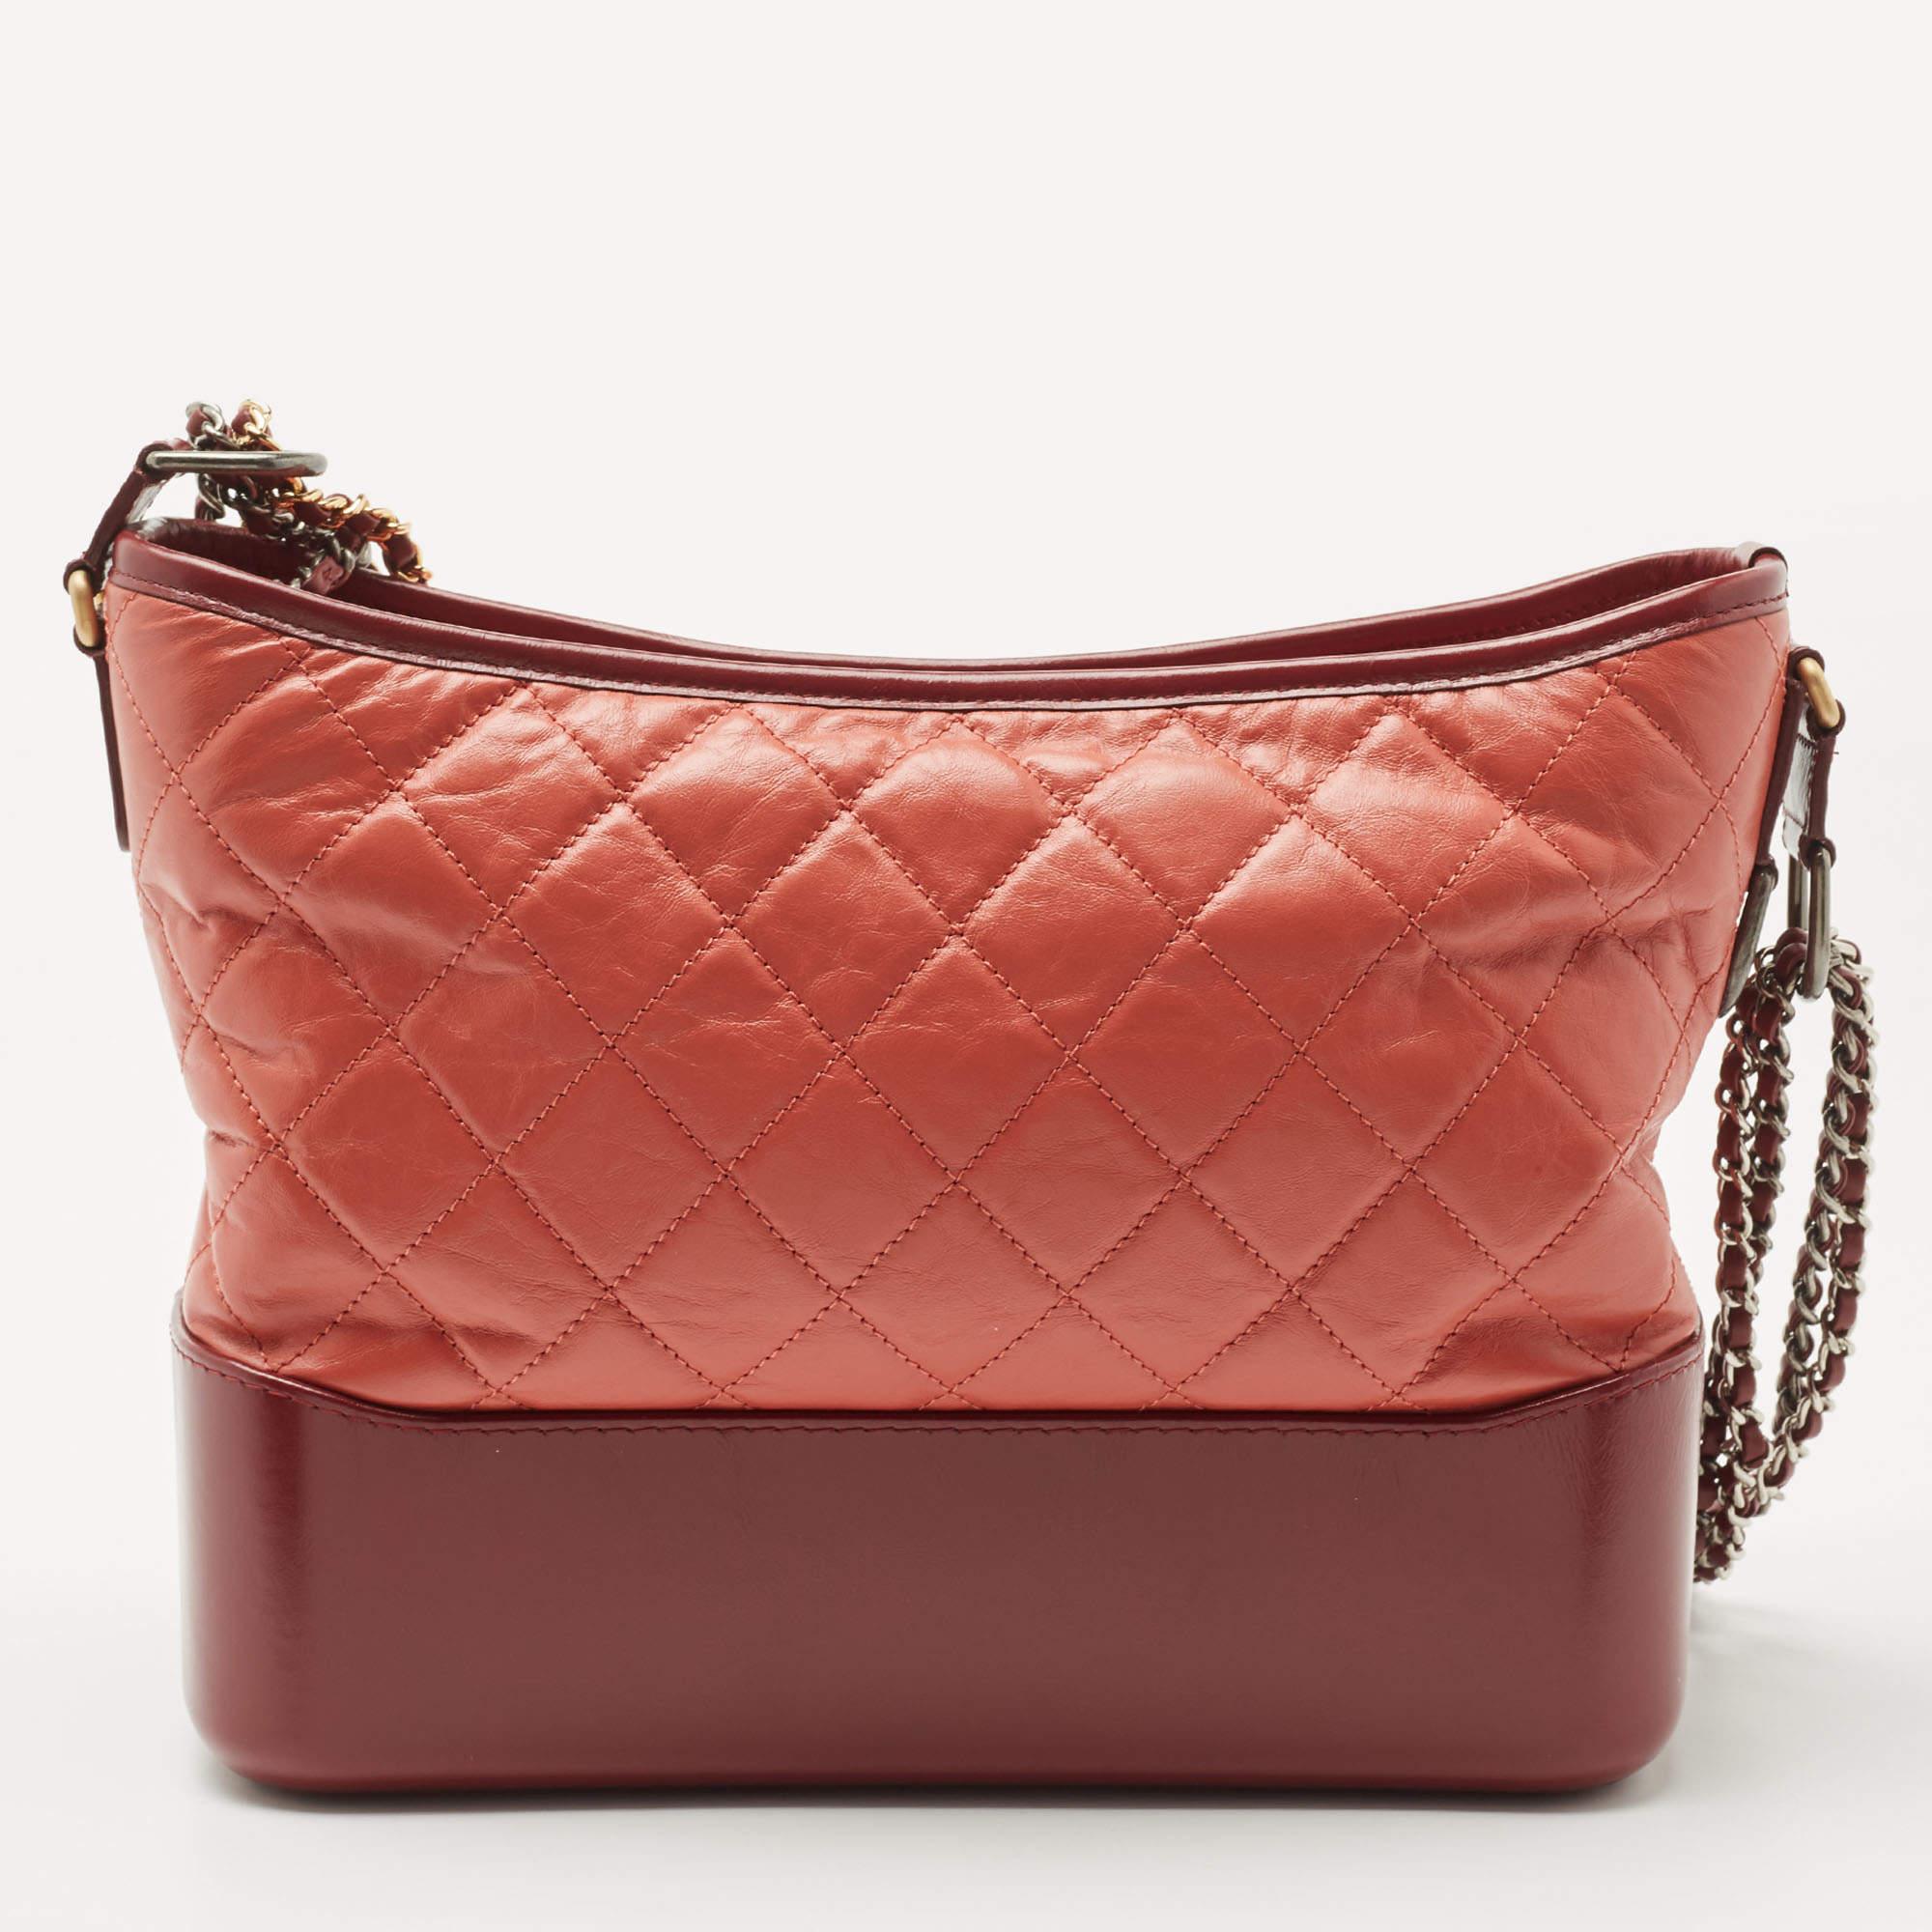 Get yourself this beautiful Gabrielle bag from the iconic house of Chanel. It exudes style and will always deliver sophistication. Crafted in Italy and made from aged leather, it comes in lovely shades of burgundy & orange. The exterior flaunts the